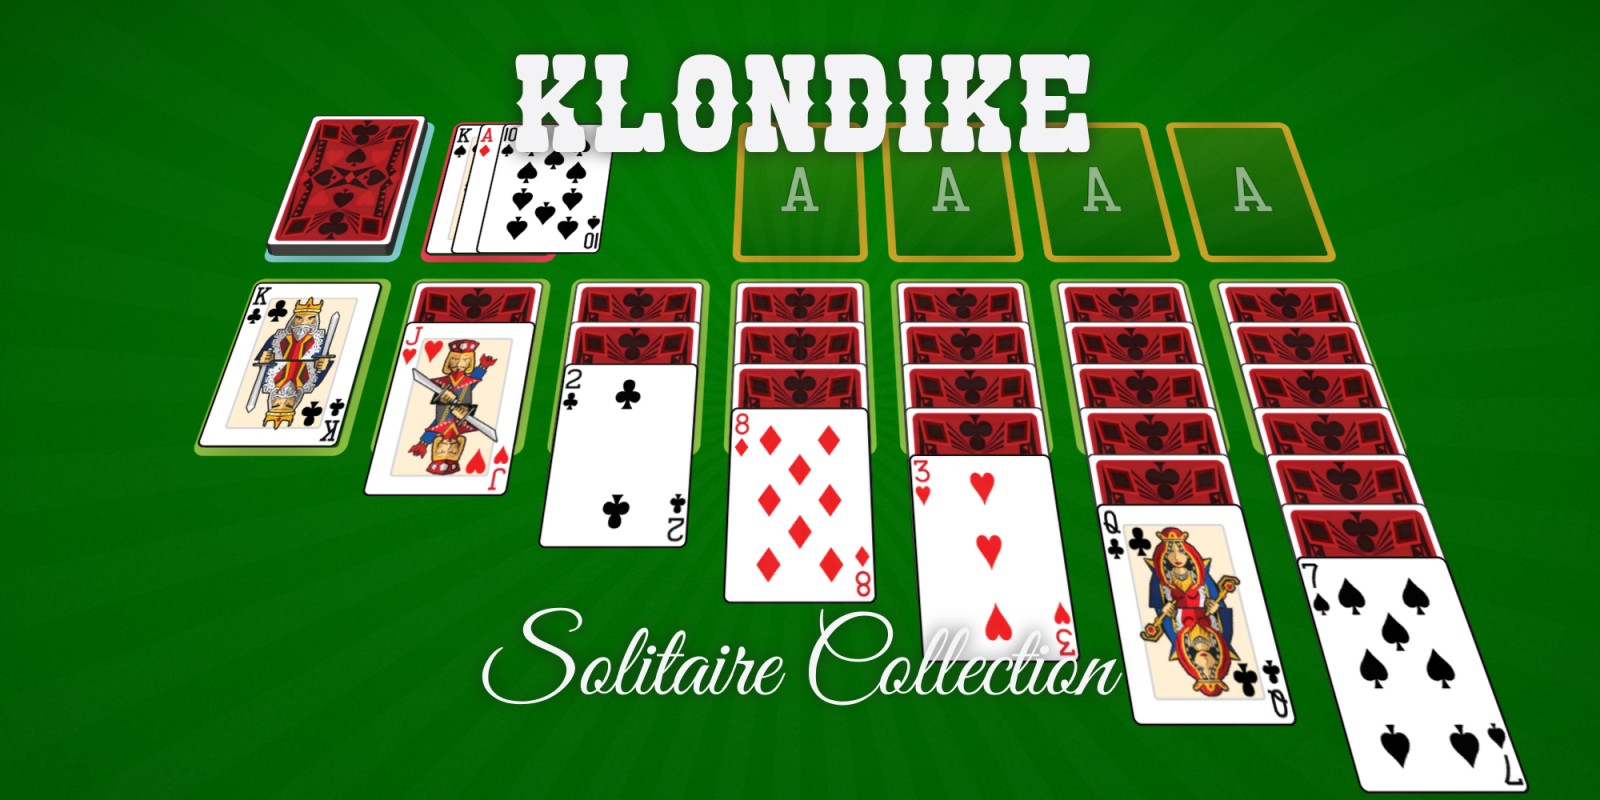 microsoft solitaire collection klondike are all games winable